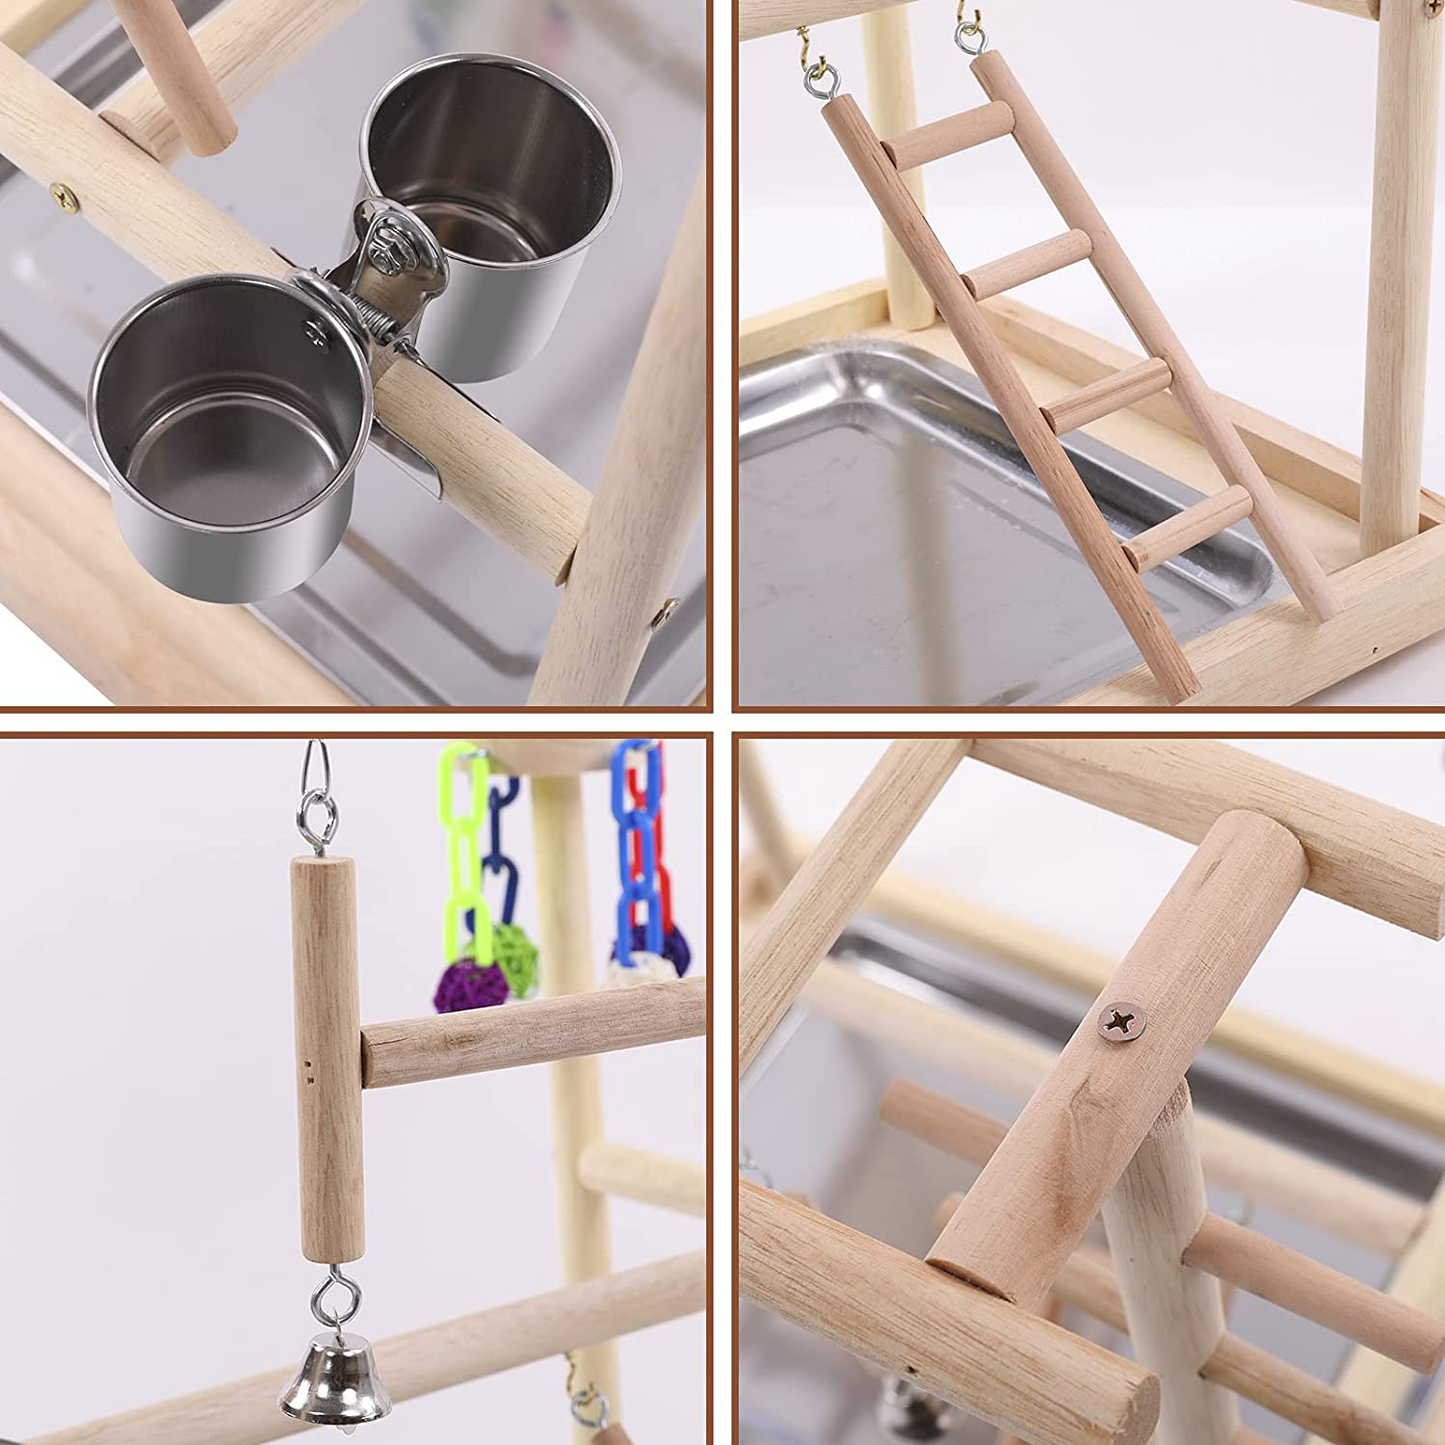 QBLEEV Bird Perches Nest Play Stand Gym Parrot Playground Playgym Playpen Playstand Swing Bridge Wood Climb Ladders Wooden Conures Parakeet Macaw African Animals & Pet Supplies > Pet Supplies > Bird Supplies > Bird Gyms & Playstands QBLEEV   